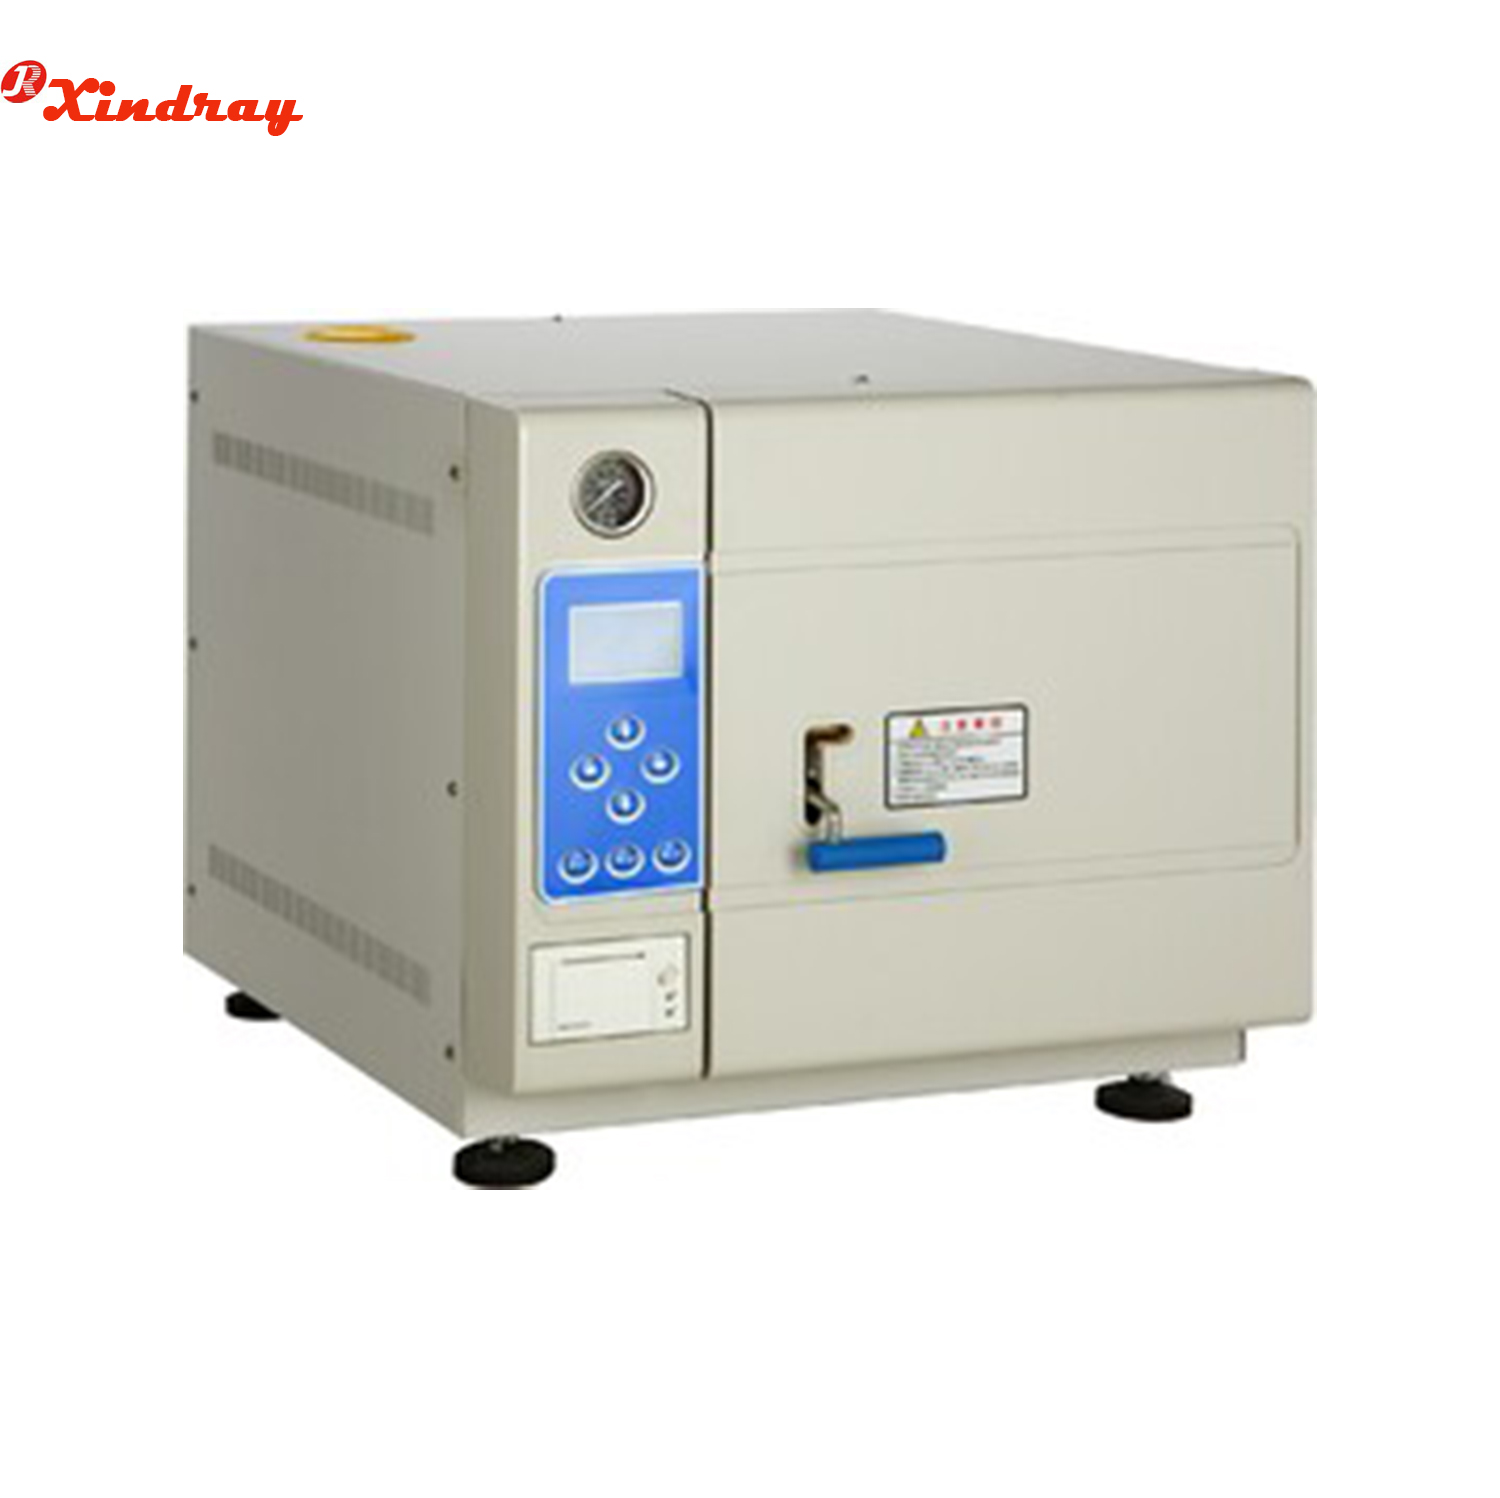 Table Type Steam Sterilizers With Pulse-Vacuum System